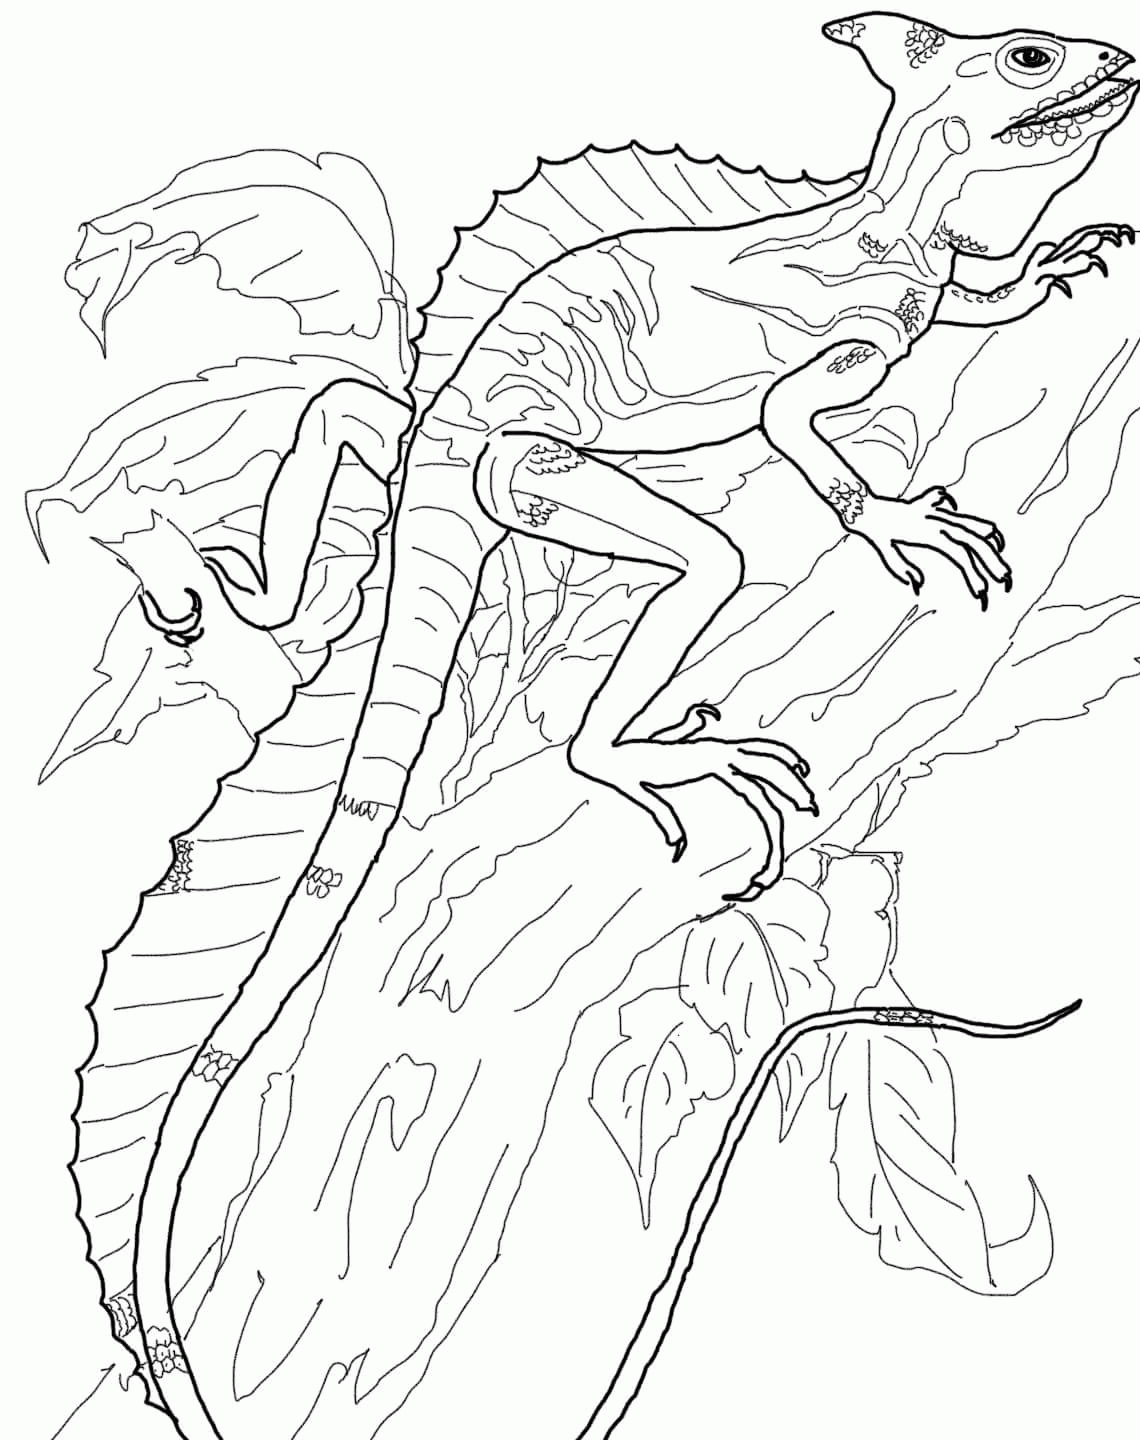 Horned Toad Coloring Page - Coloring Page